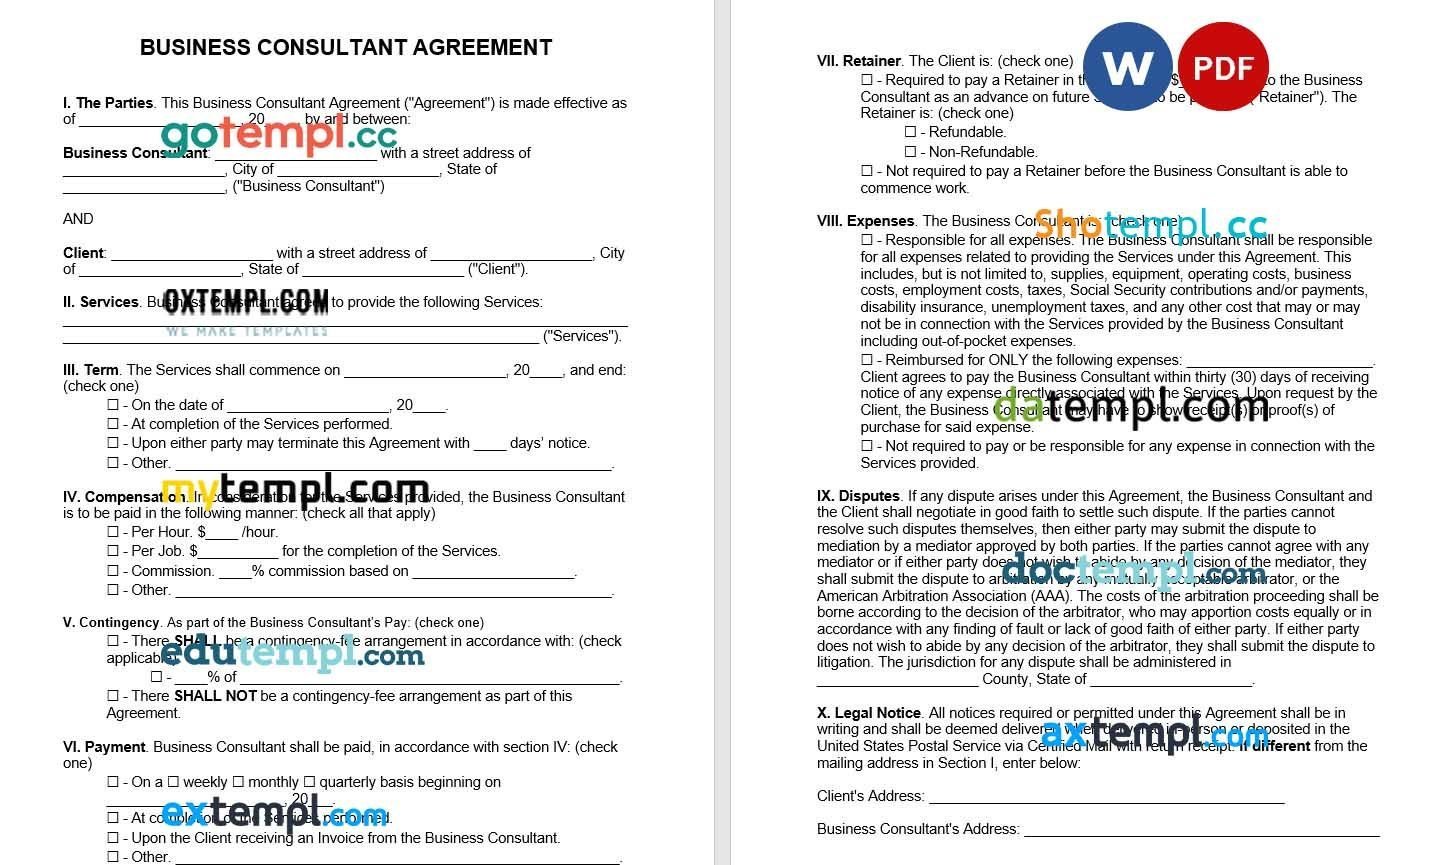 Business Consultant Agreement Word example, fully editable